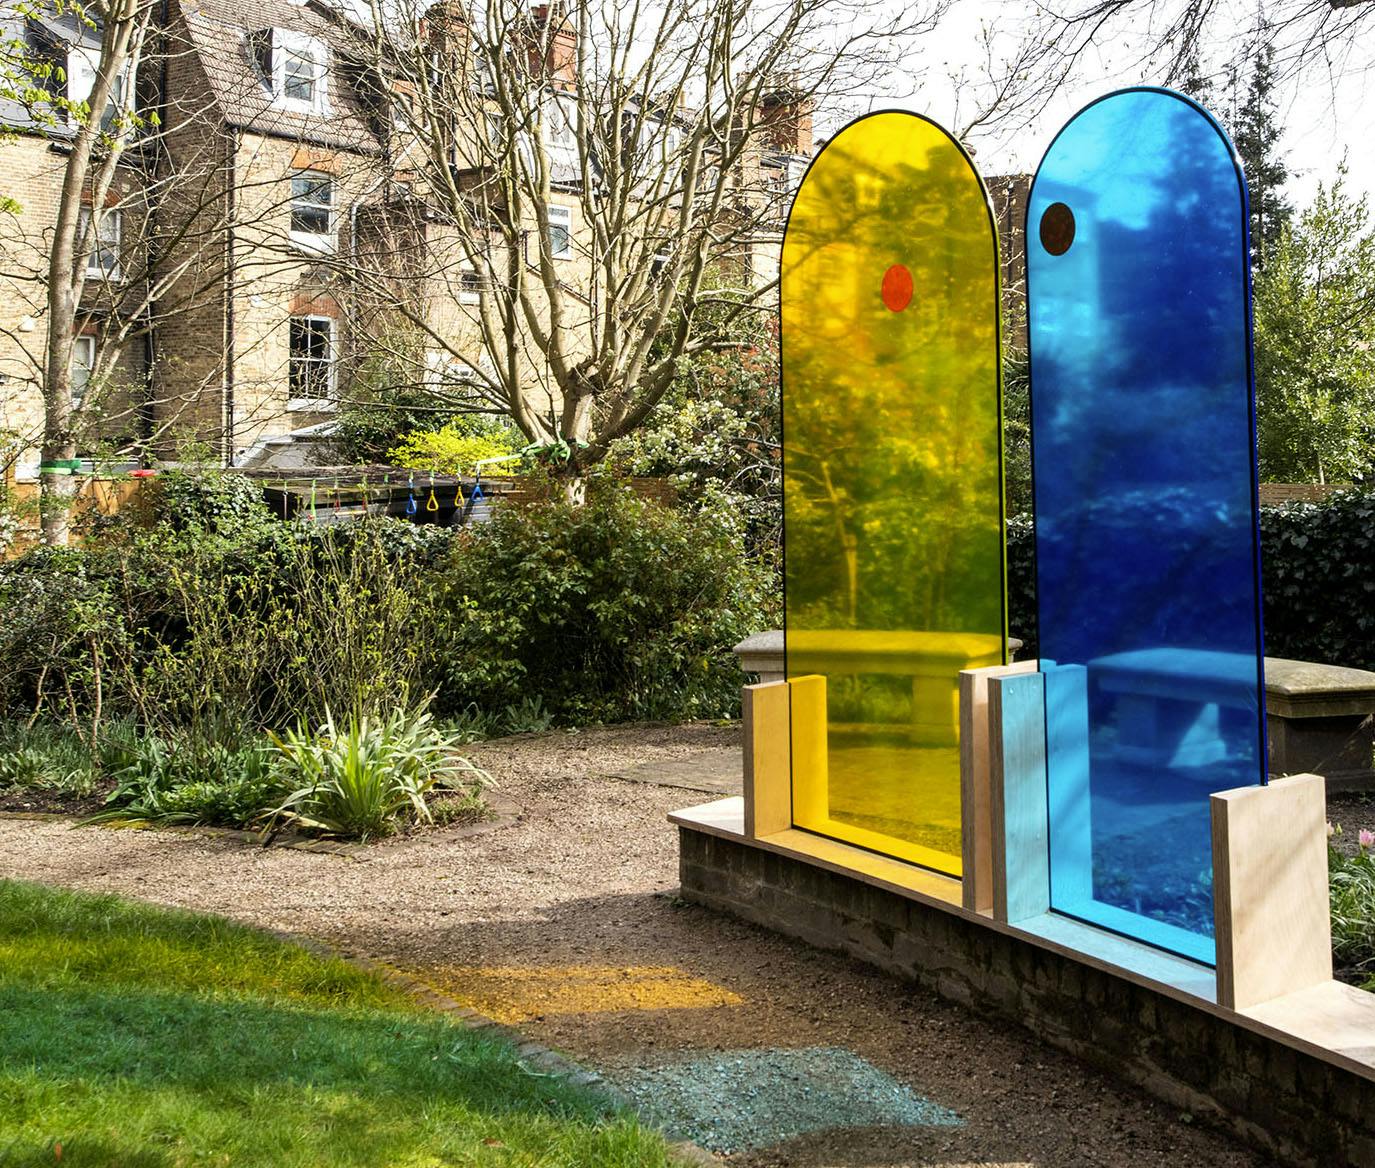 The union',  pair of colored glass arch shaped sculptures by the artist Henry Coleman placed in the garden of JMW Turner's House, Sandycombe Lodge, an artwork illuminating the friendship of JMW Turner and the architect Sir John Soane